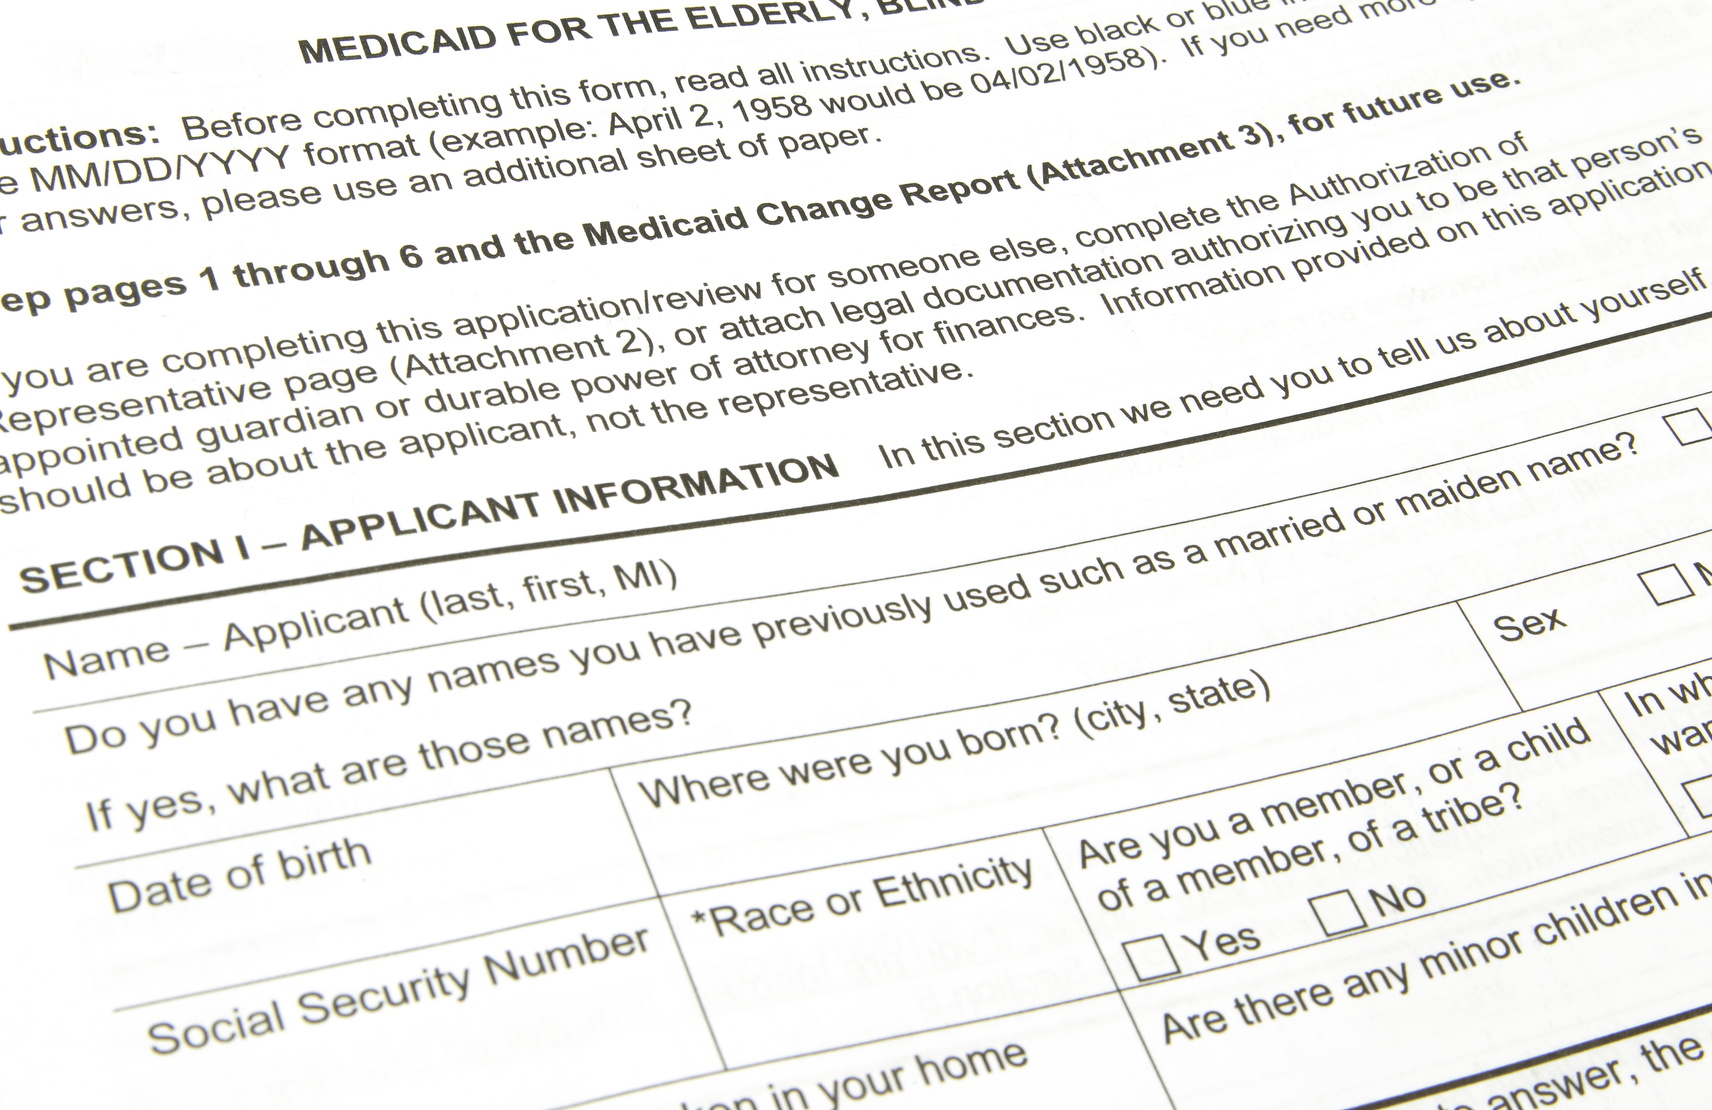 Medicaid Application - Retired Americans